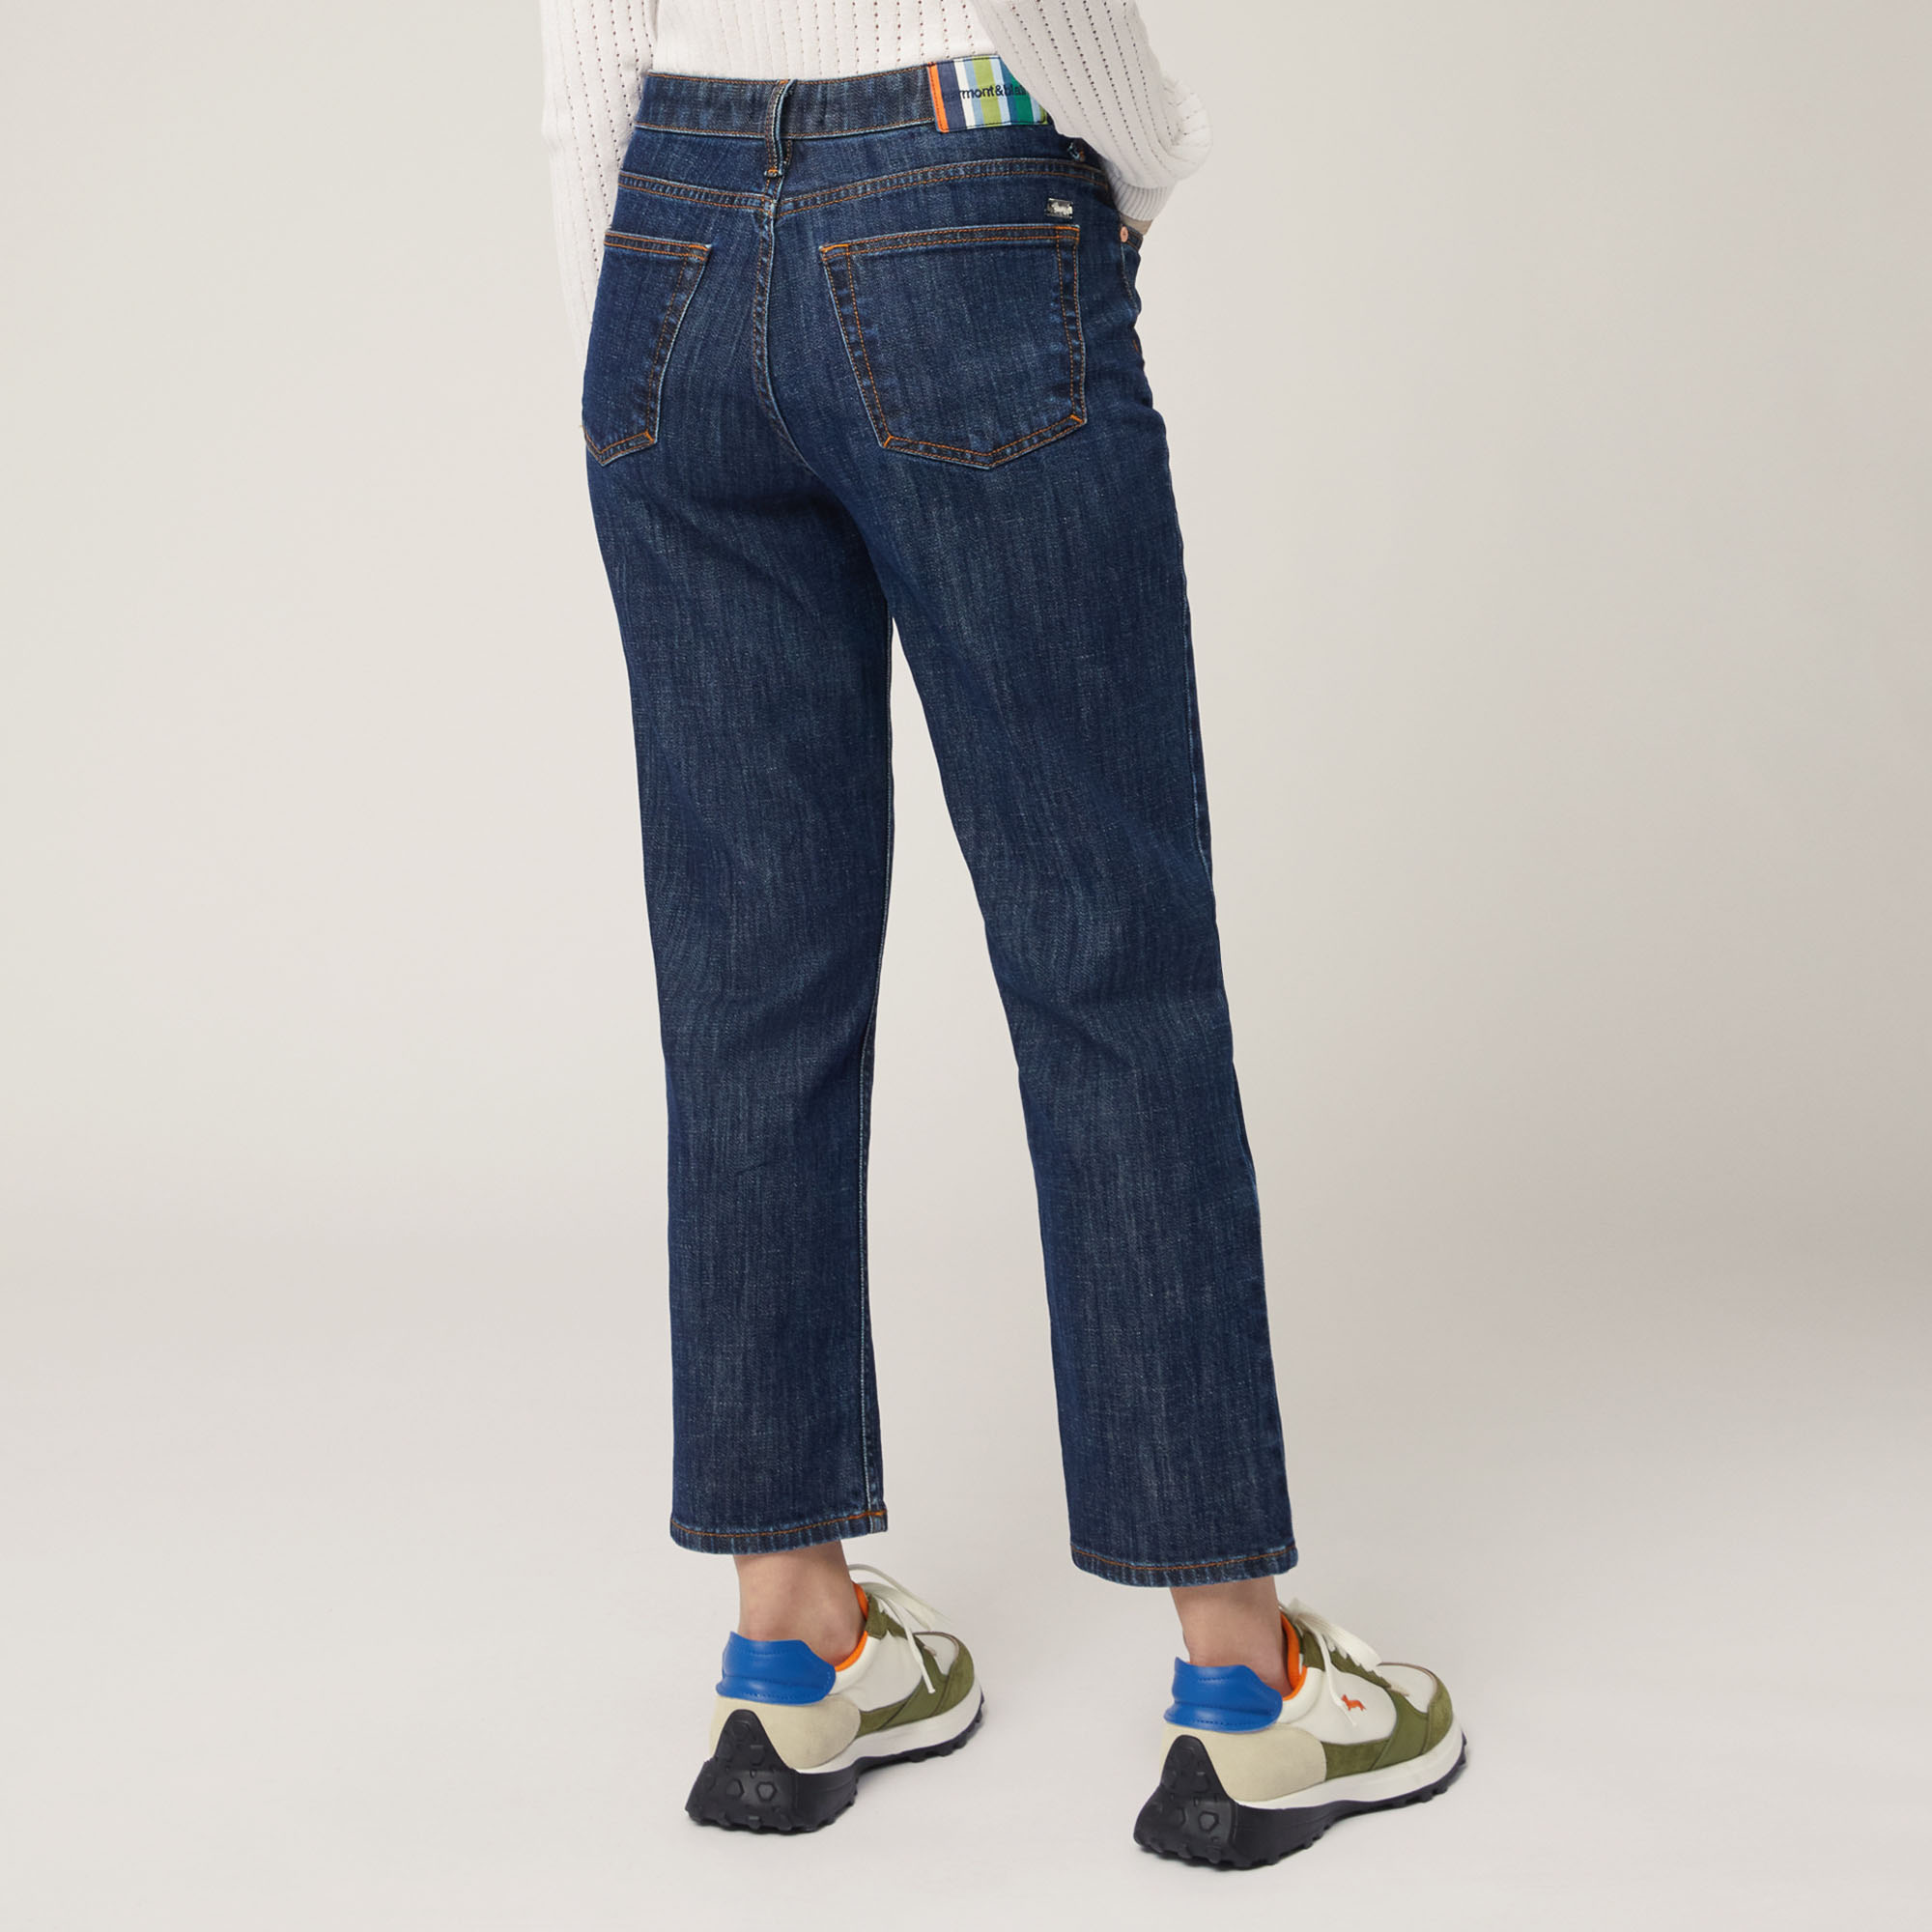 Denim Trousers with Striped Label, Blue, large image number 1